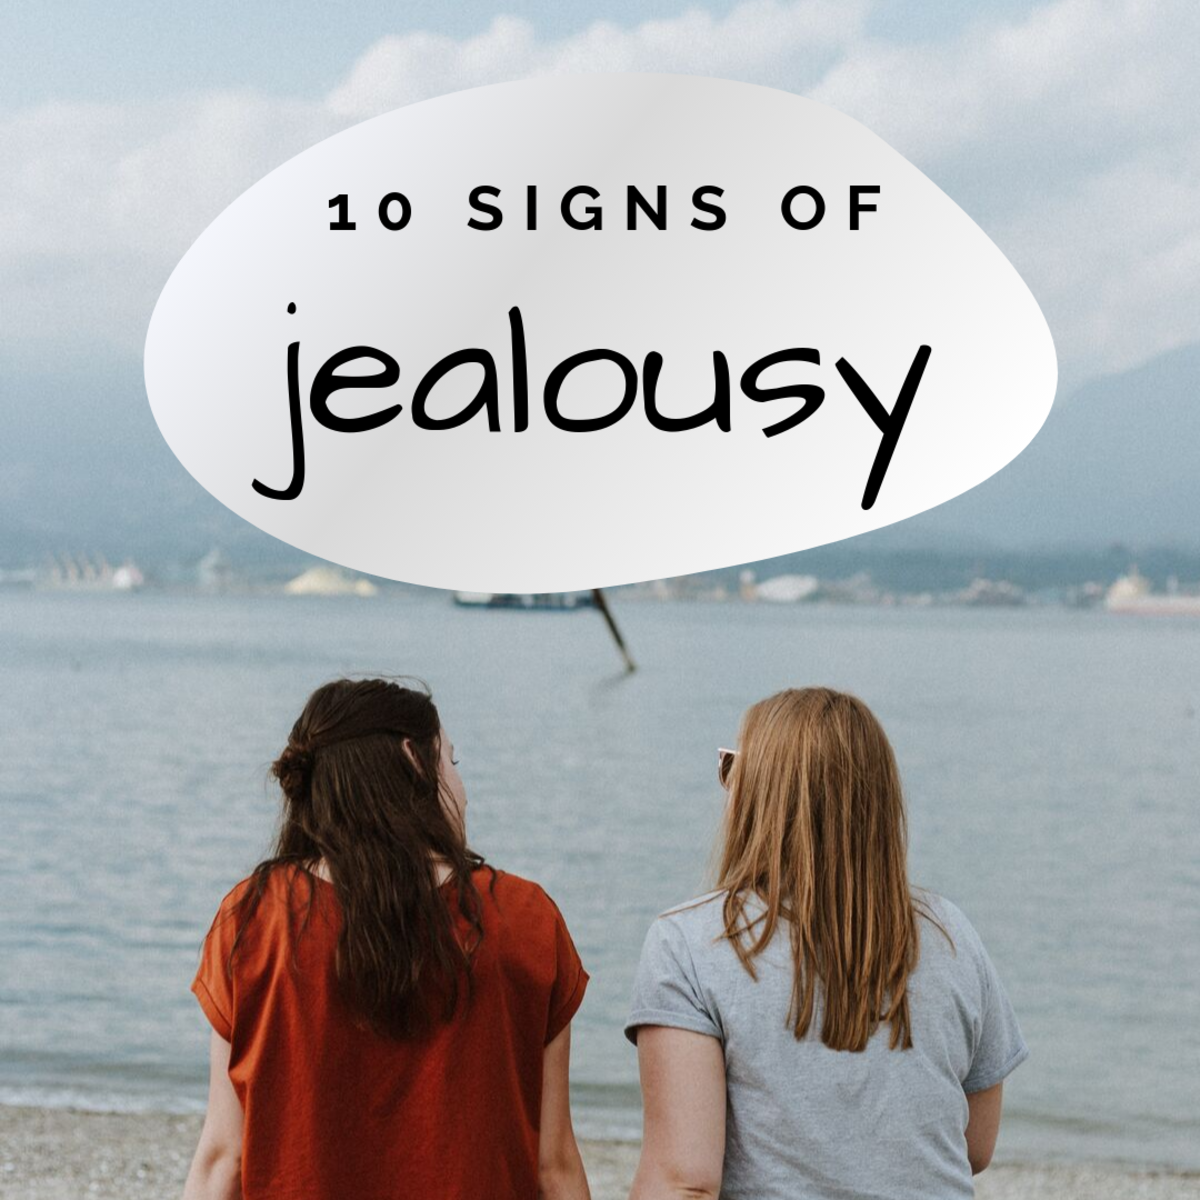 10 Subtle Signs of Jealousy: How to Tell If a Friend or Family Member Is Jealous of You